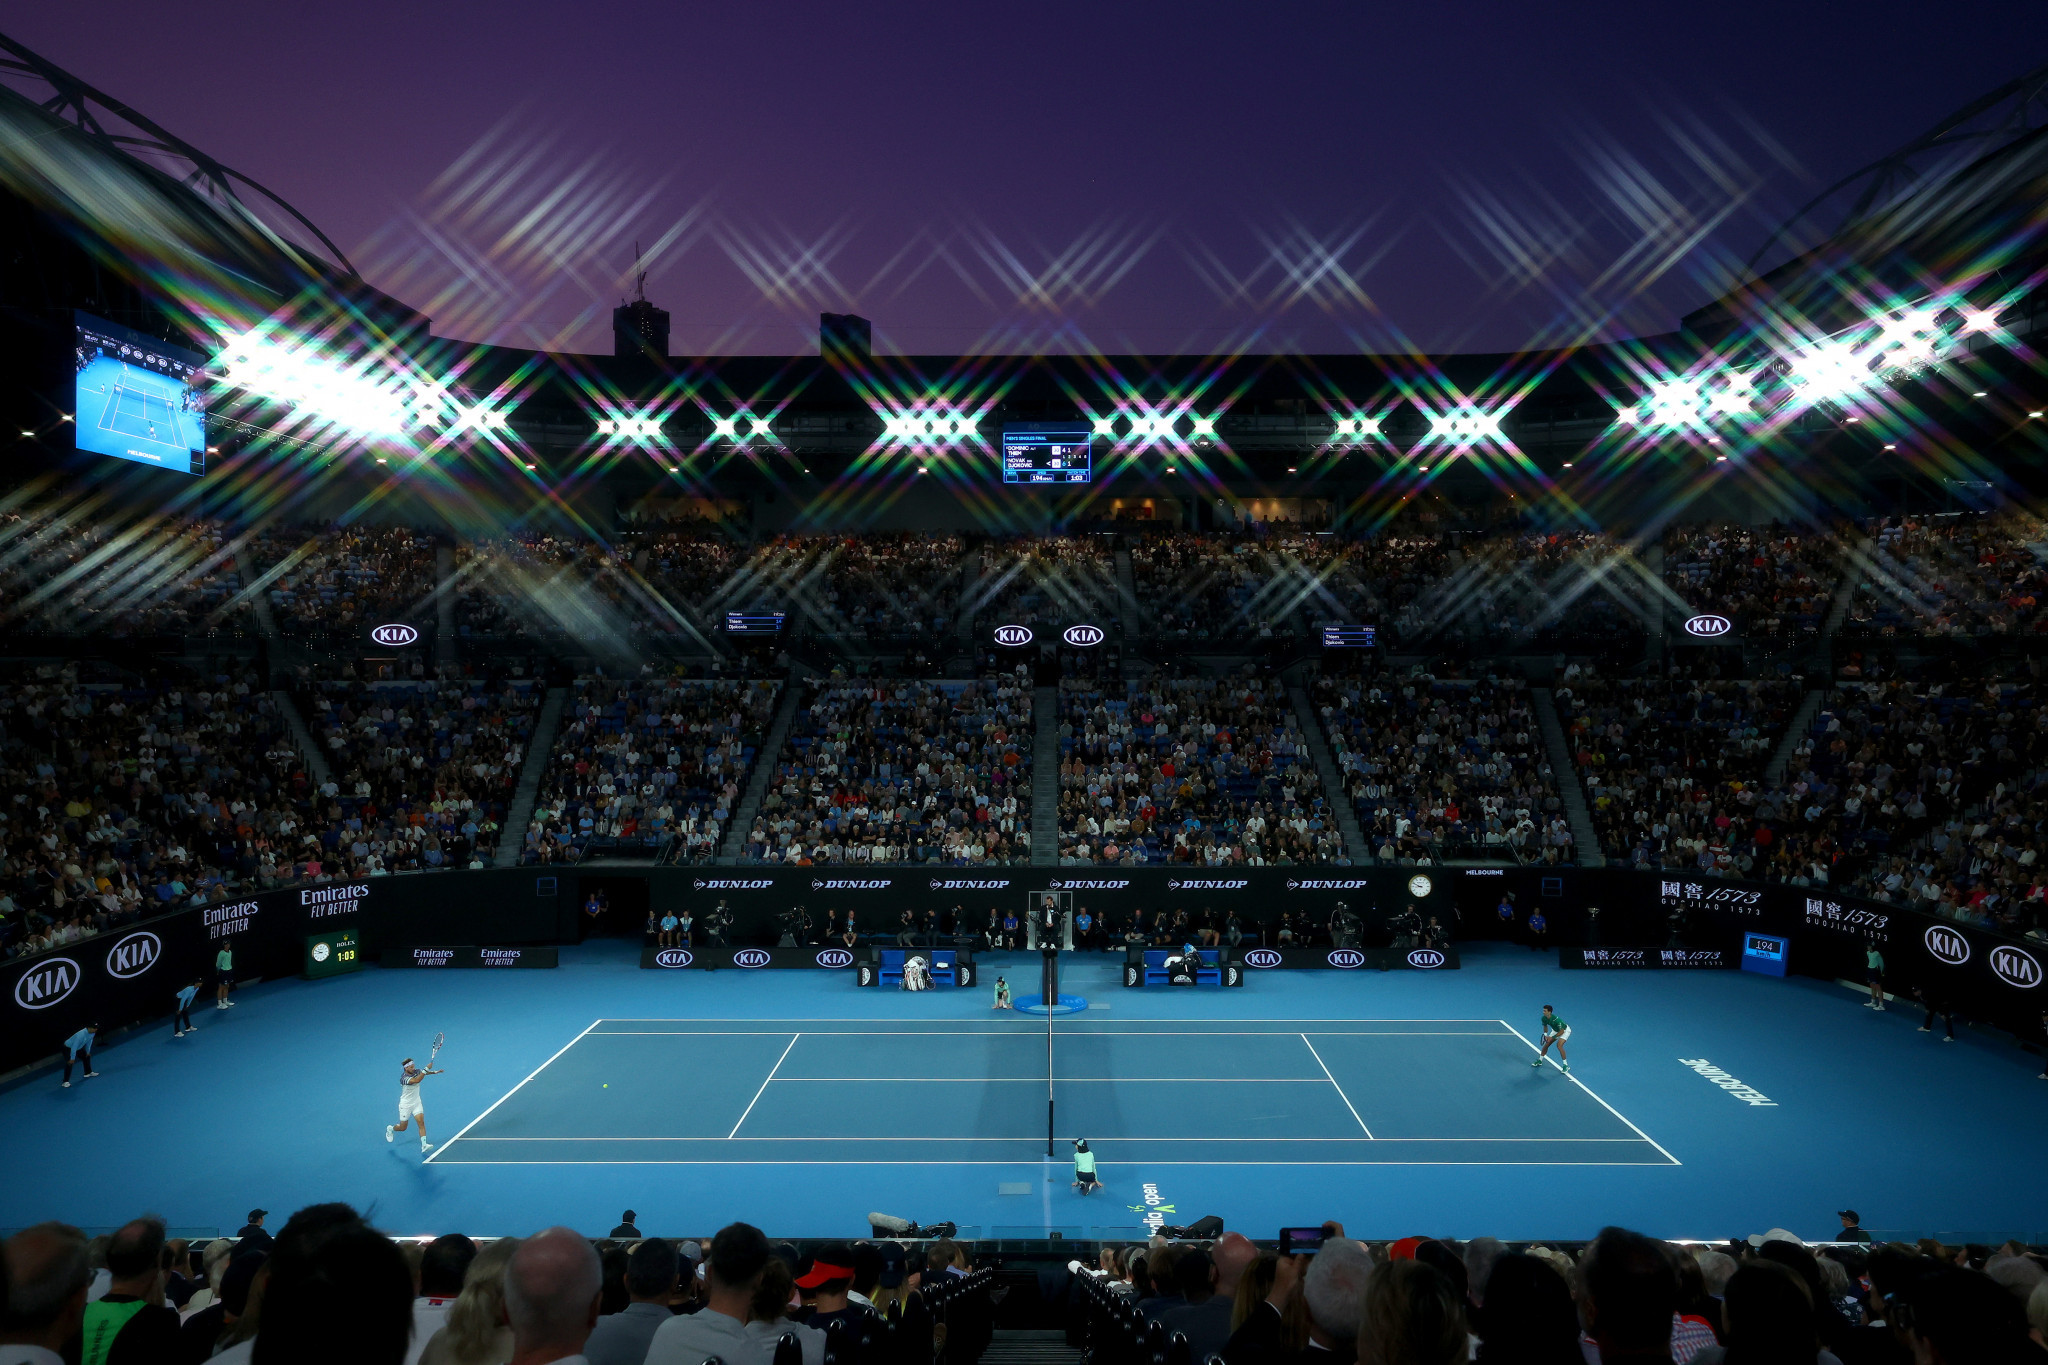 Under the current plans, the 15,000-seater Rod Laver Arena will hold 25 per cent of its capacity ©Getty Images